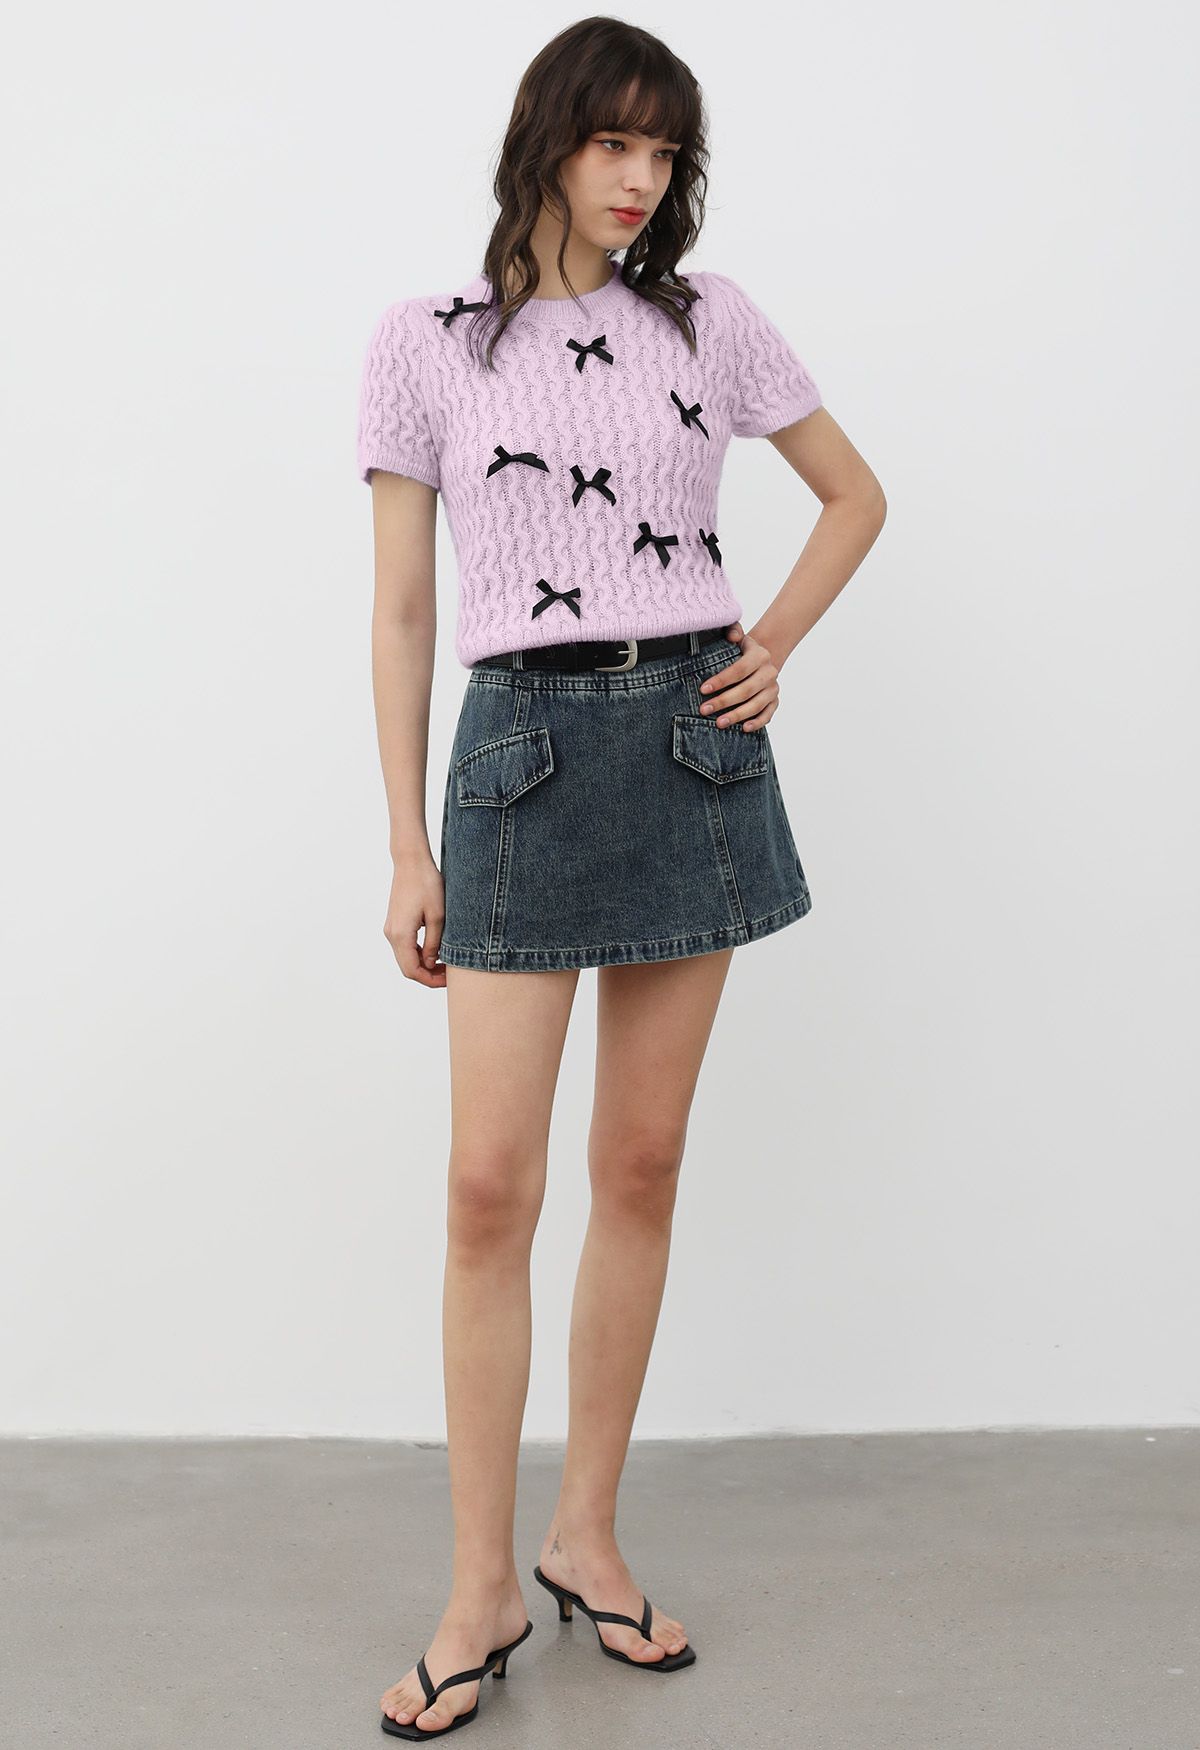 Endearing Bowknot Embellished Short Sleeve Knit Top in Lilac